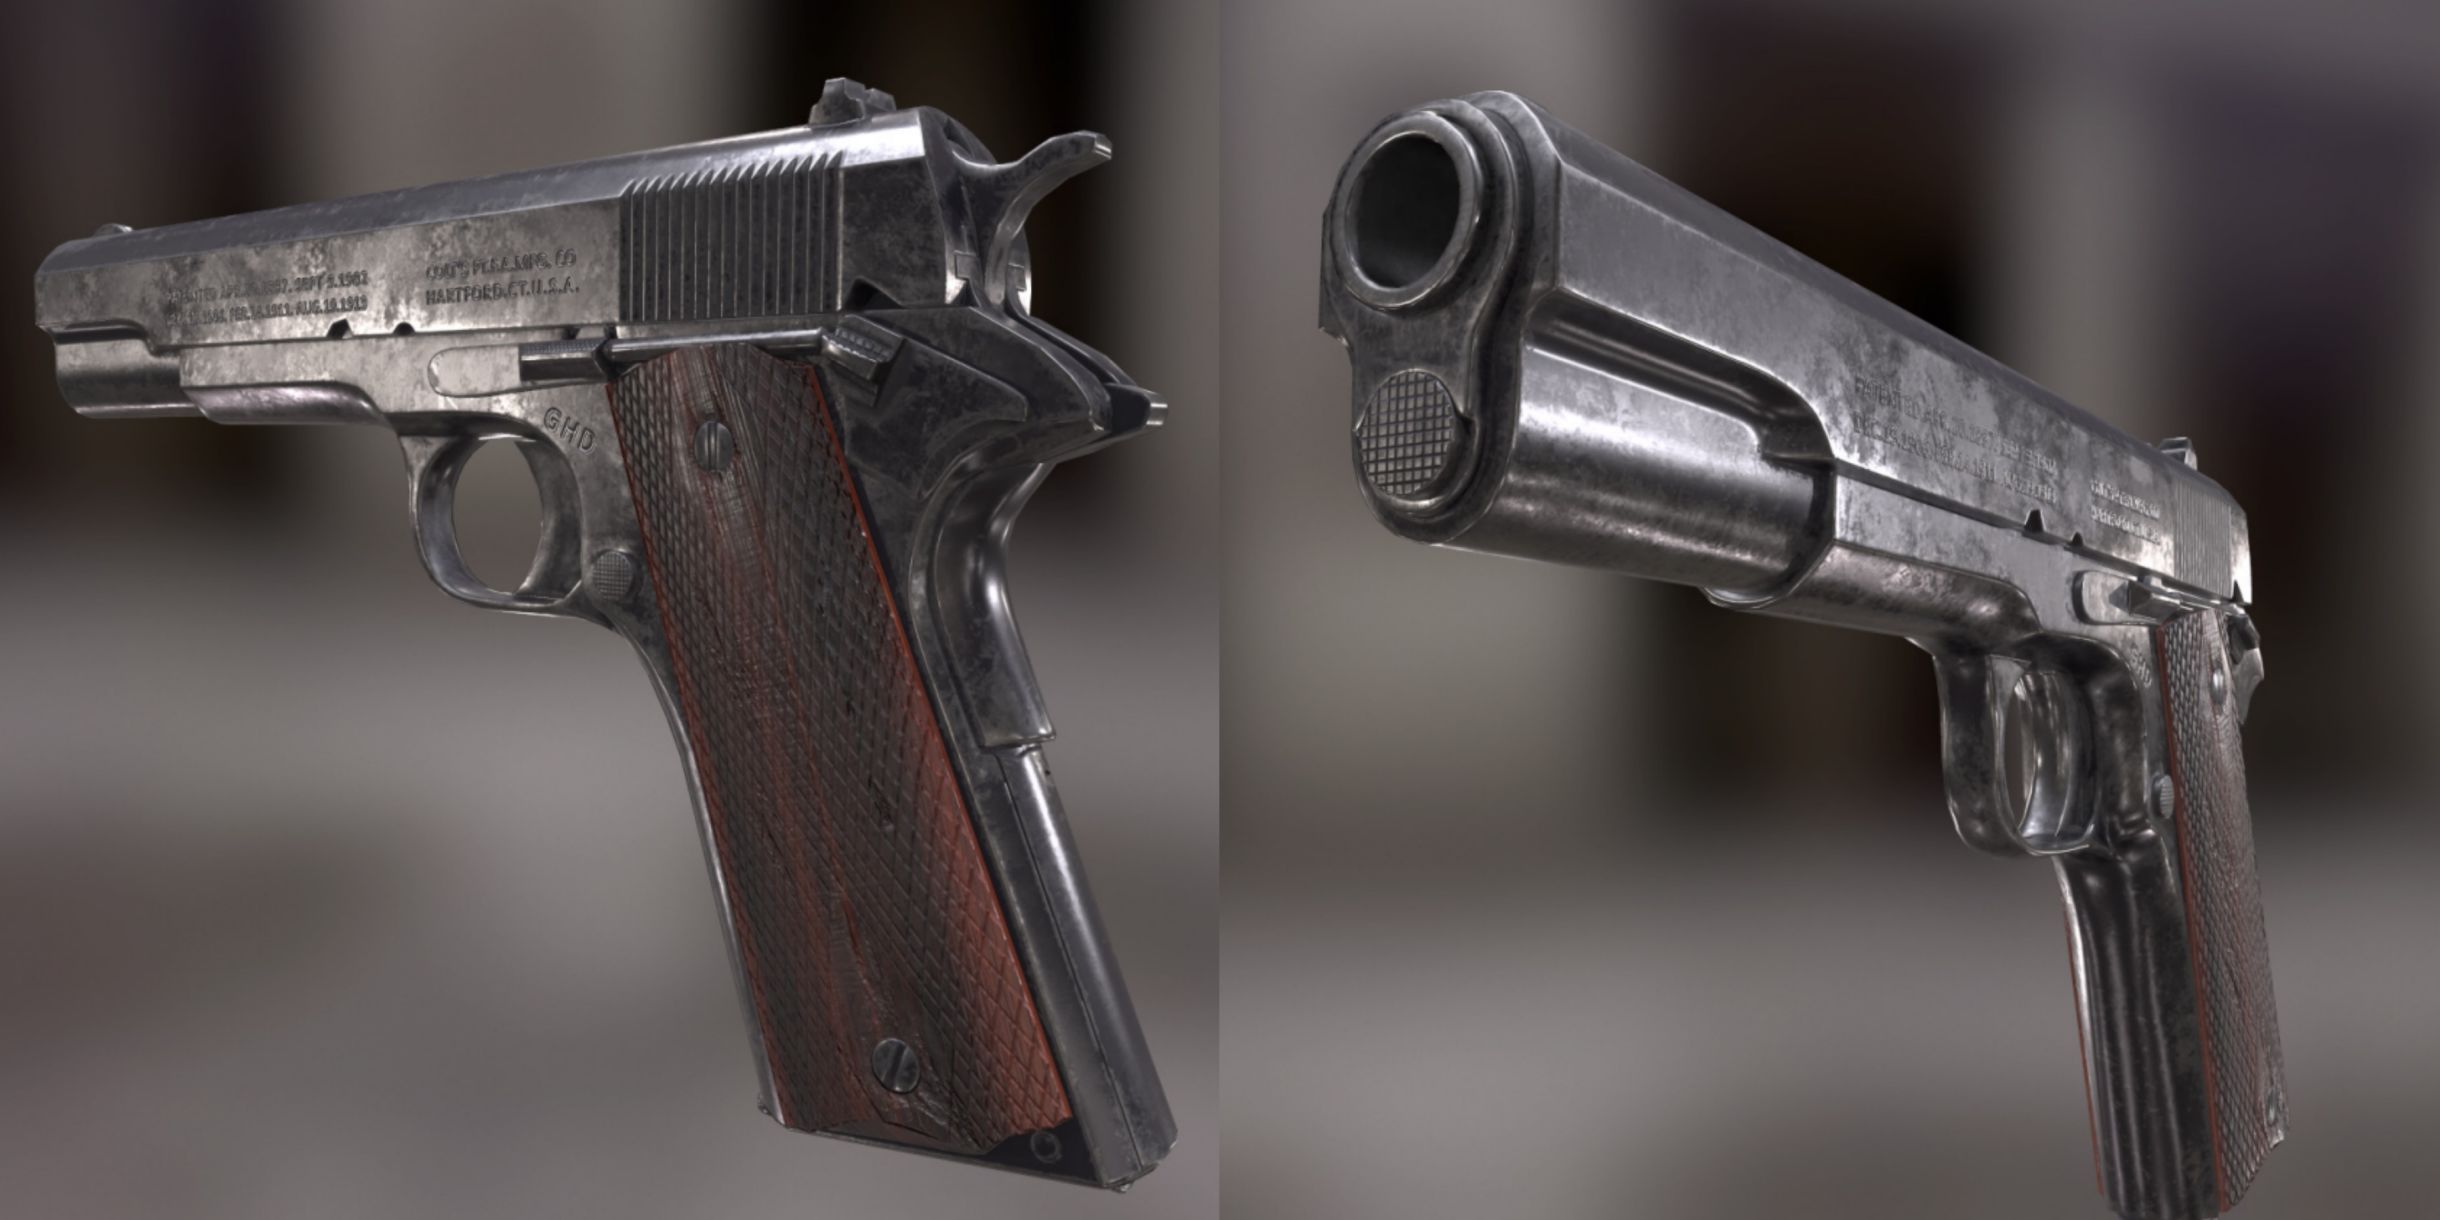 Realistic Texturing & Rendering of Guns